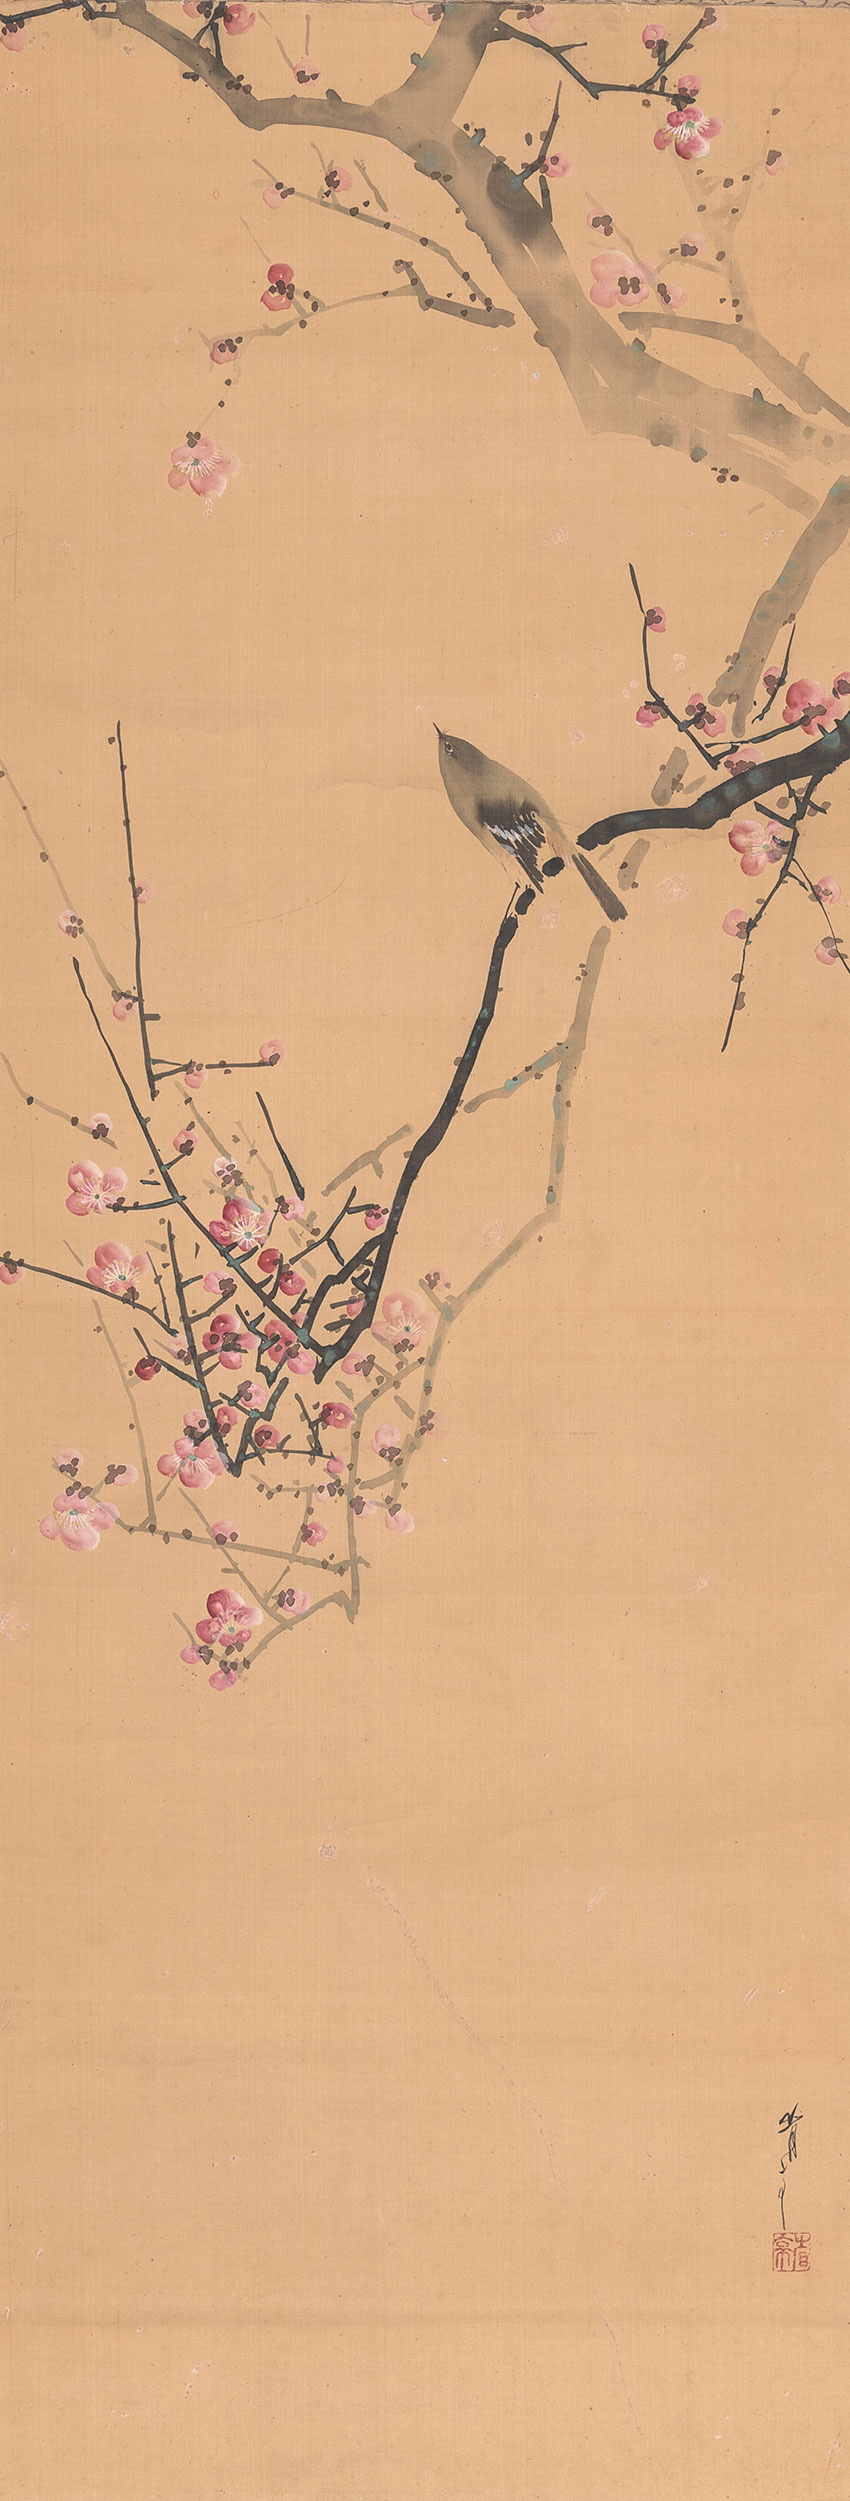 Watanabe Seitei, Tokyo, 1852-1918. A bush warbler on a branch of a flowering plum, 1910s. Painting in ink and colours on silk, 118,7 x 41,2 cm_RET